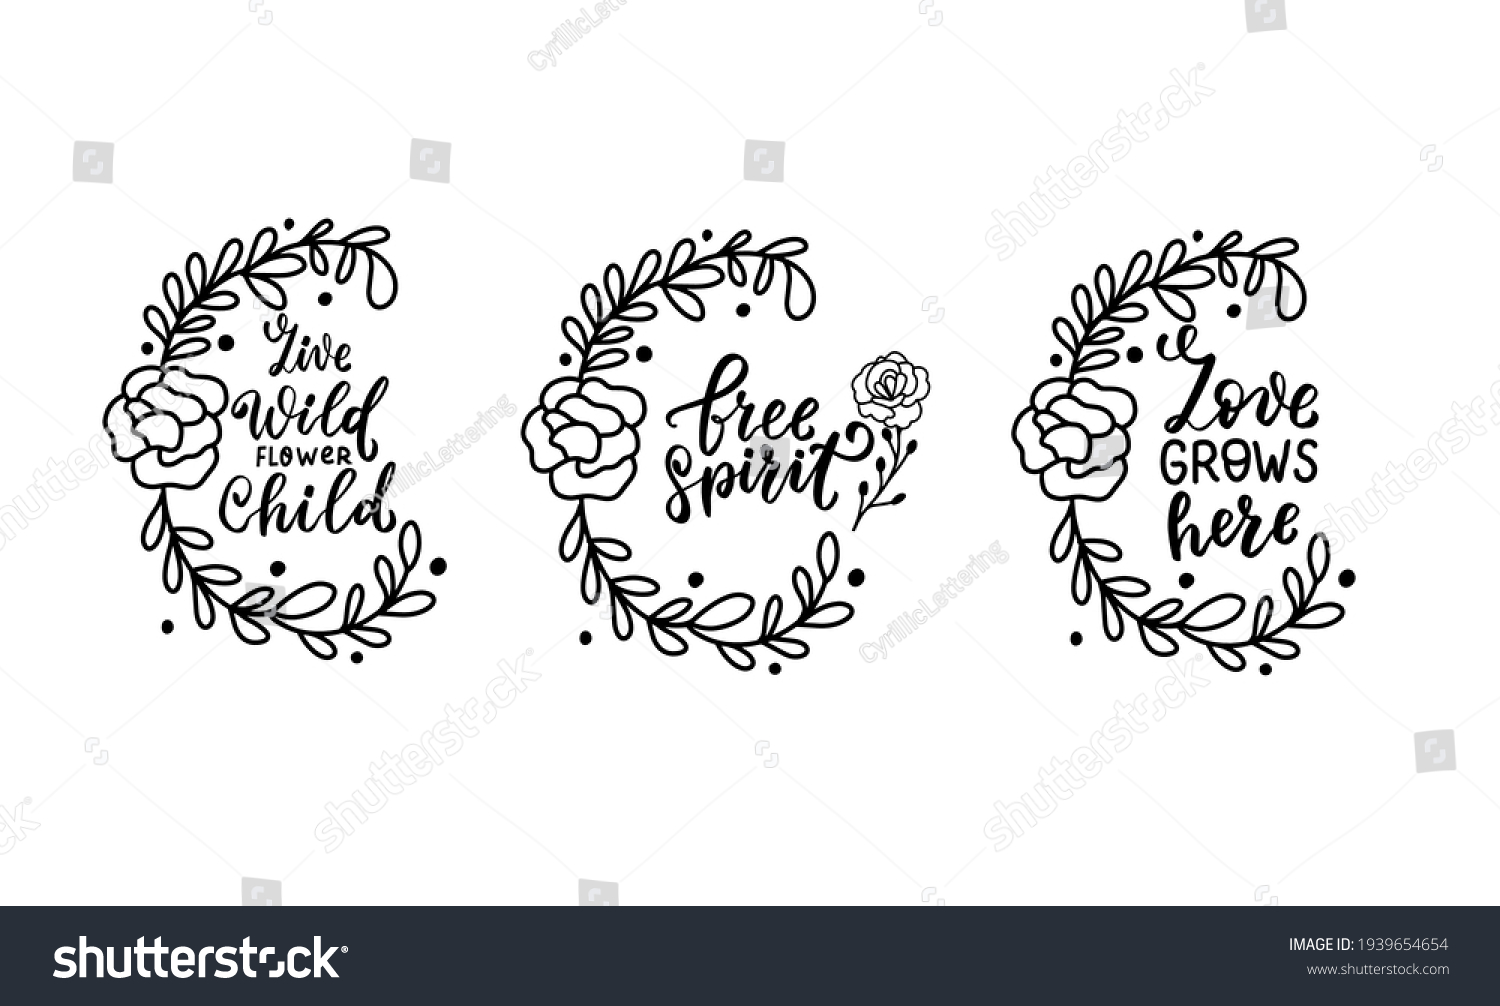 SVG of Live wild flower child. Love grows here. Free spirit quote. Hand lettering boho celestial quote. Wild flowers wreathe. Gypsy rustic bohemian vector illustration for shirt design. Boho clipart. svg